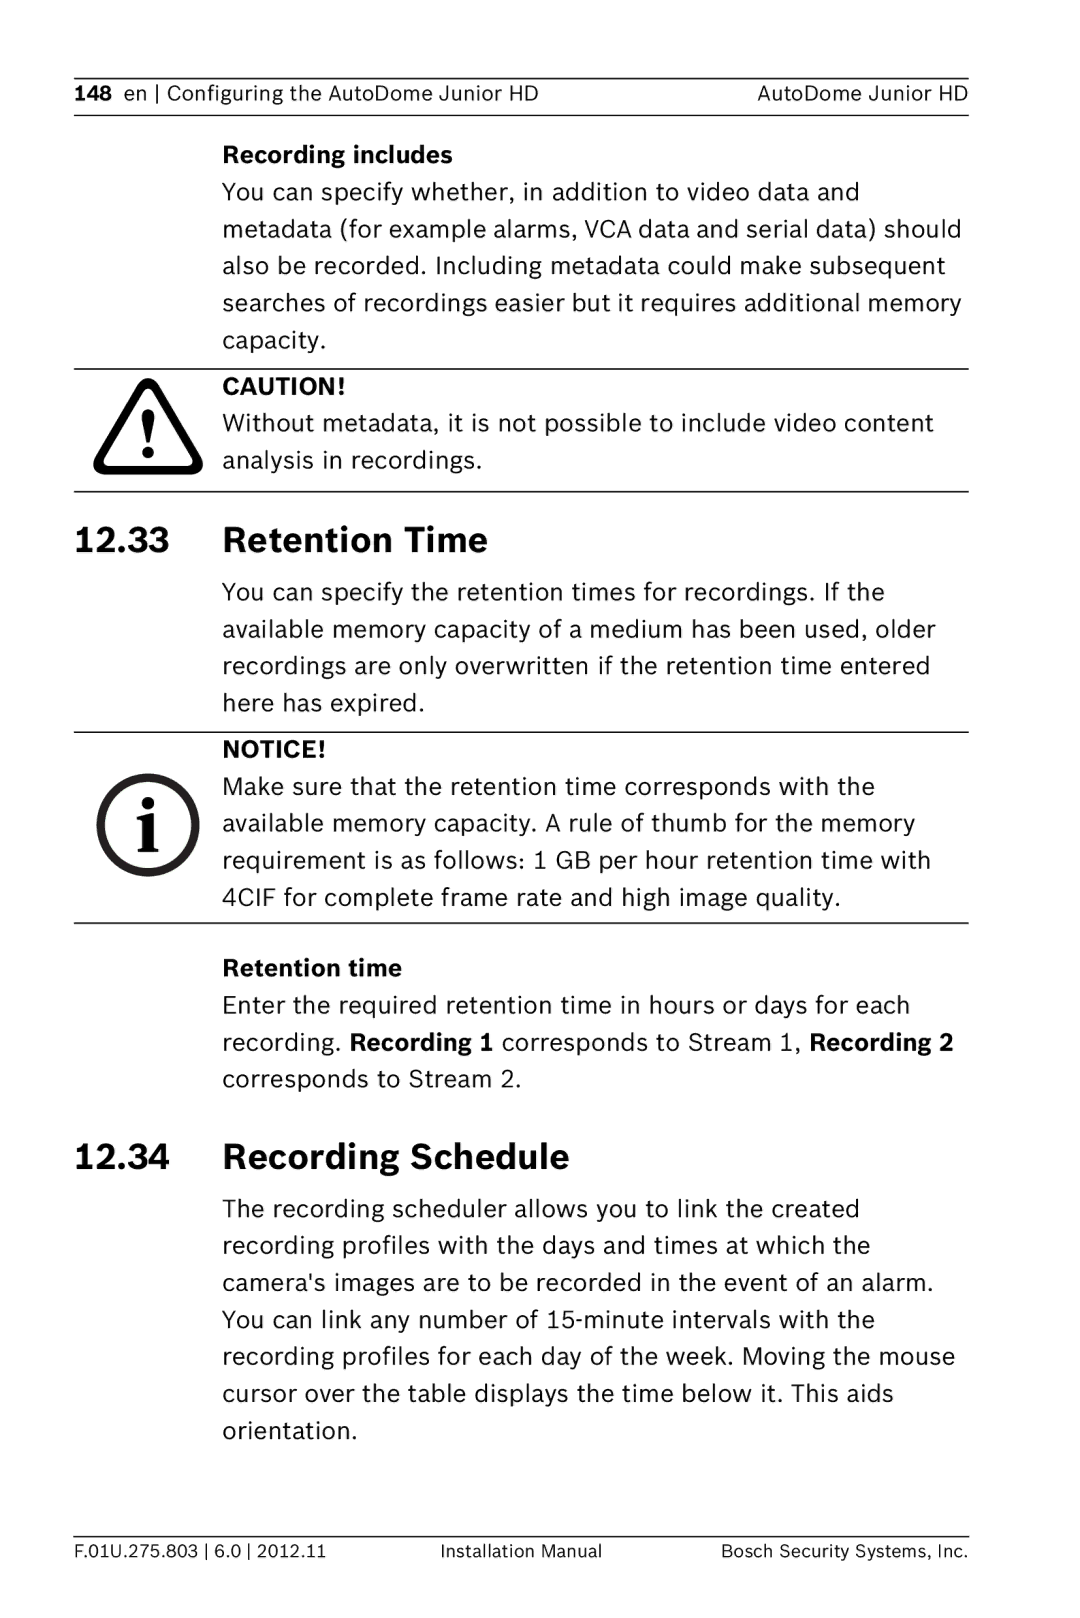 Bosch Appliances VJR SERIES installation manual Retention Time, Recording Schedule, Recording includes, Retention time 